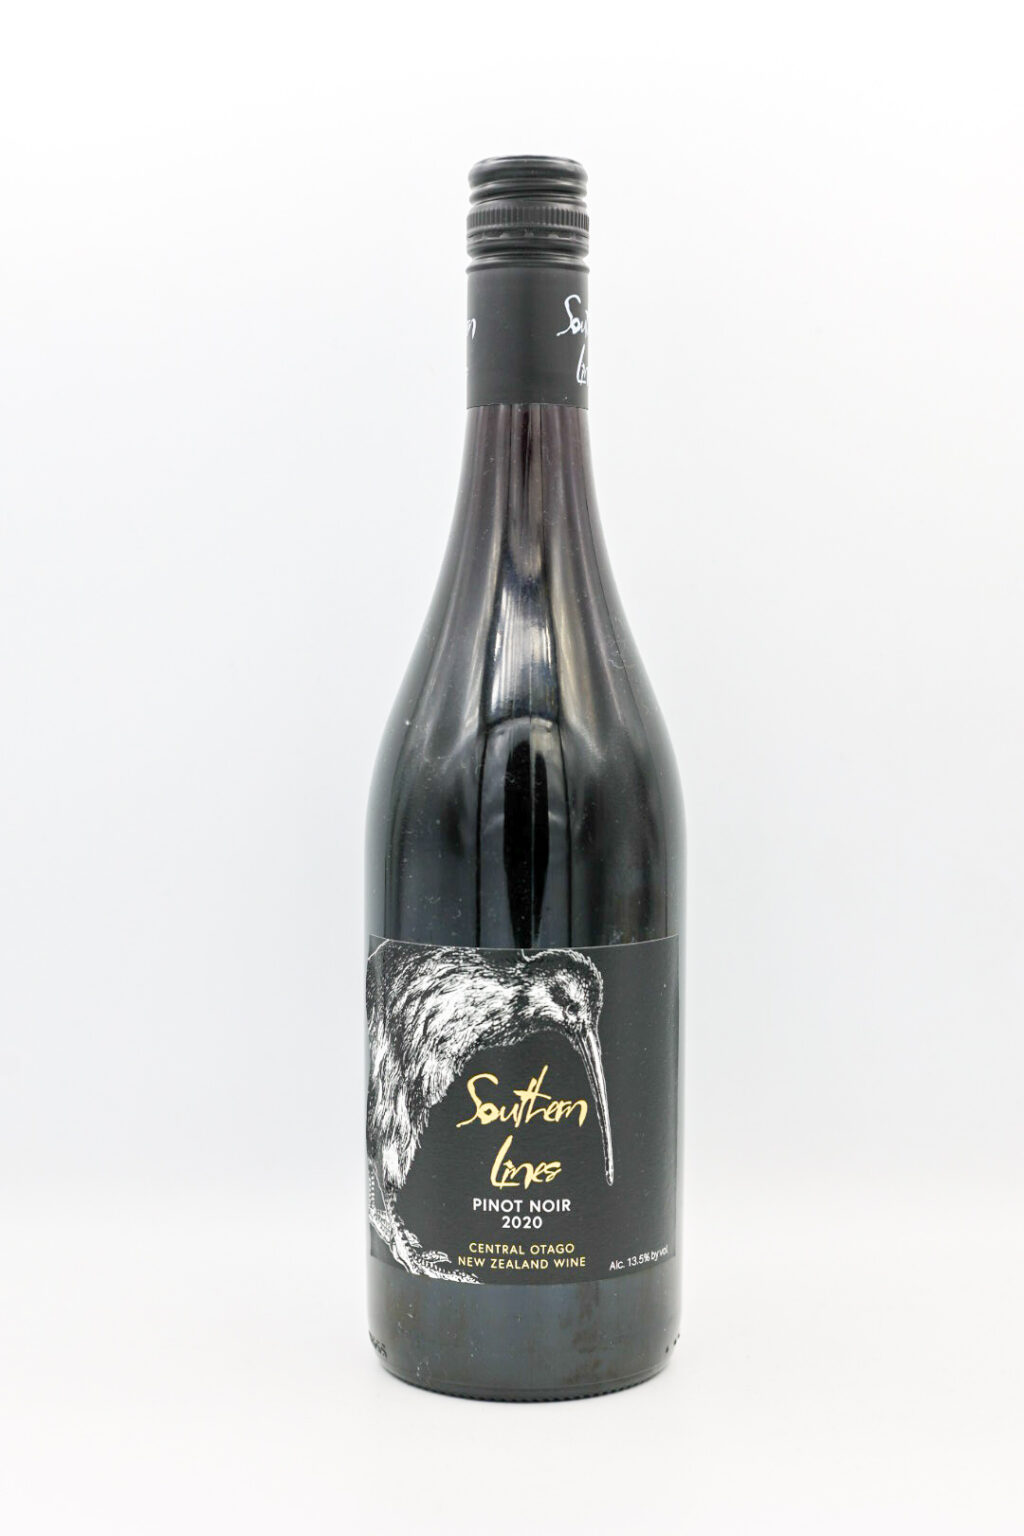 Southern Lines Pinot Noir 2021